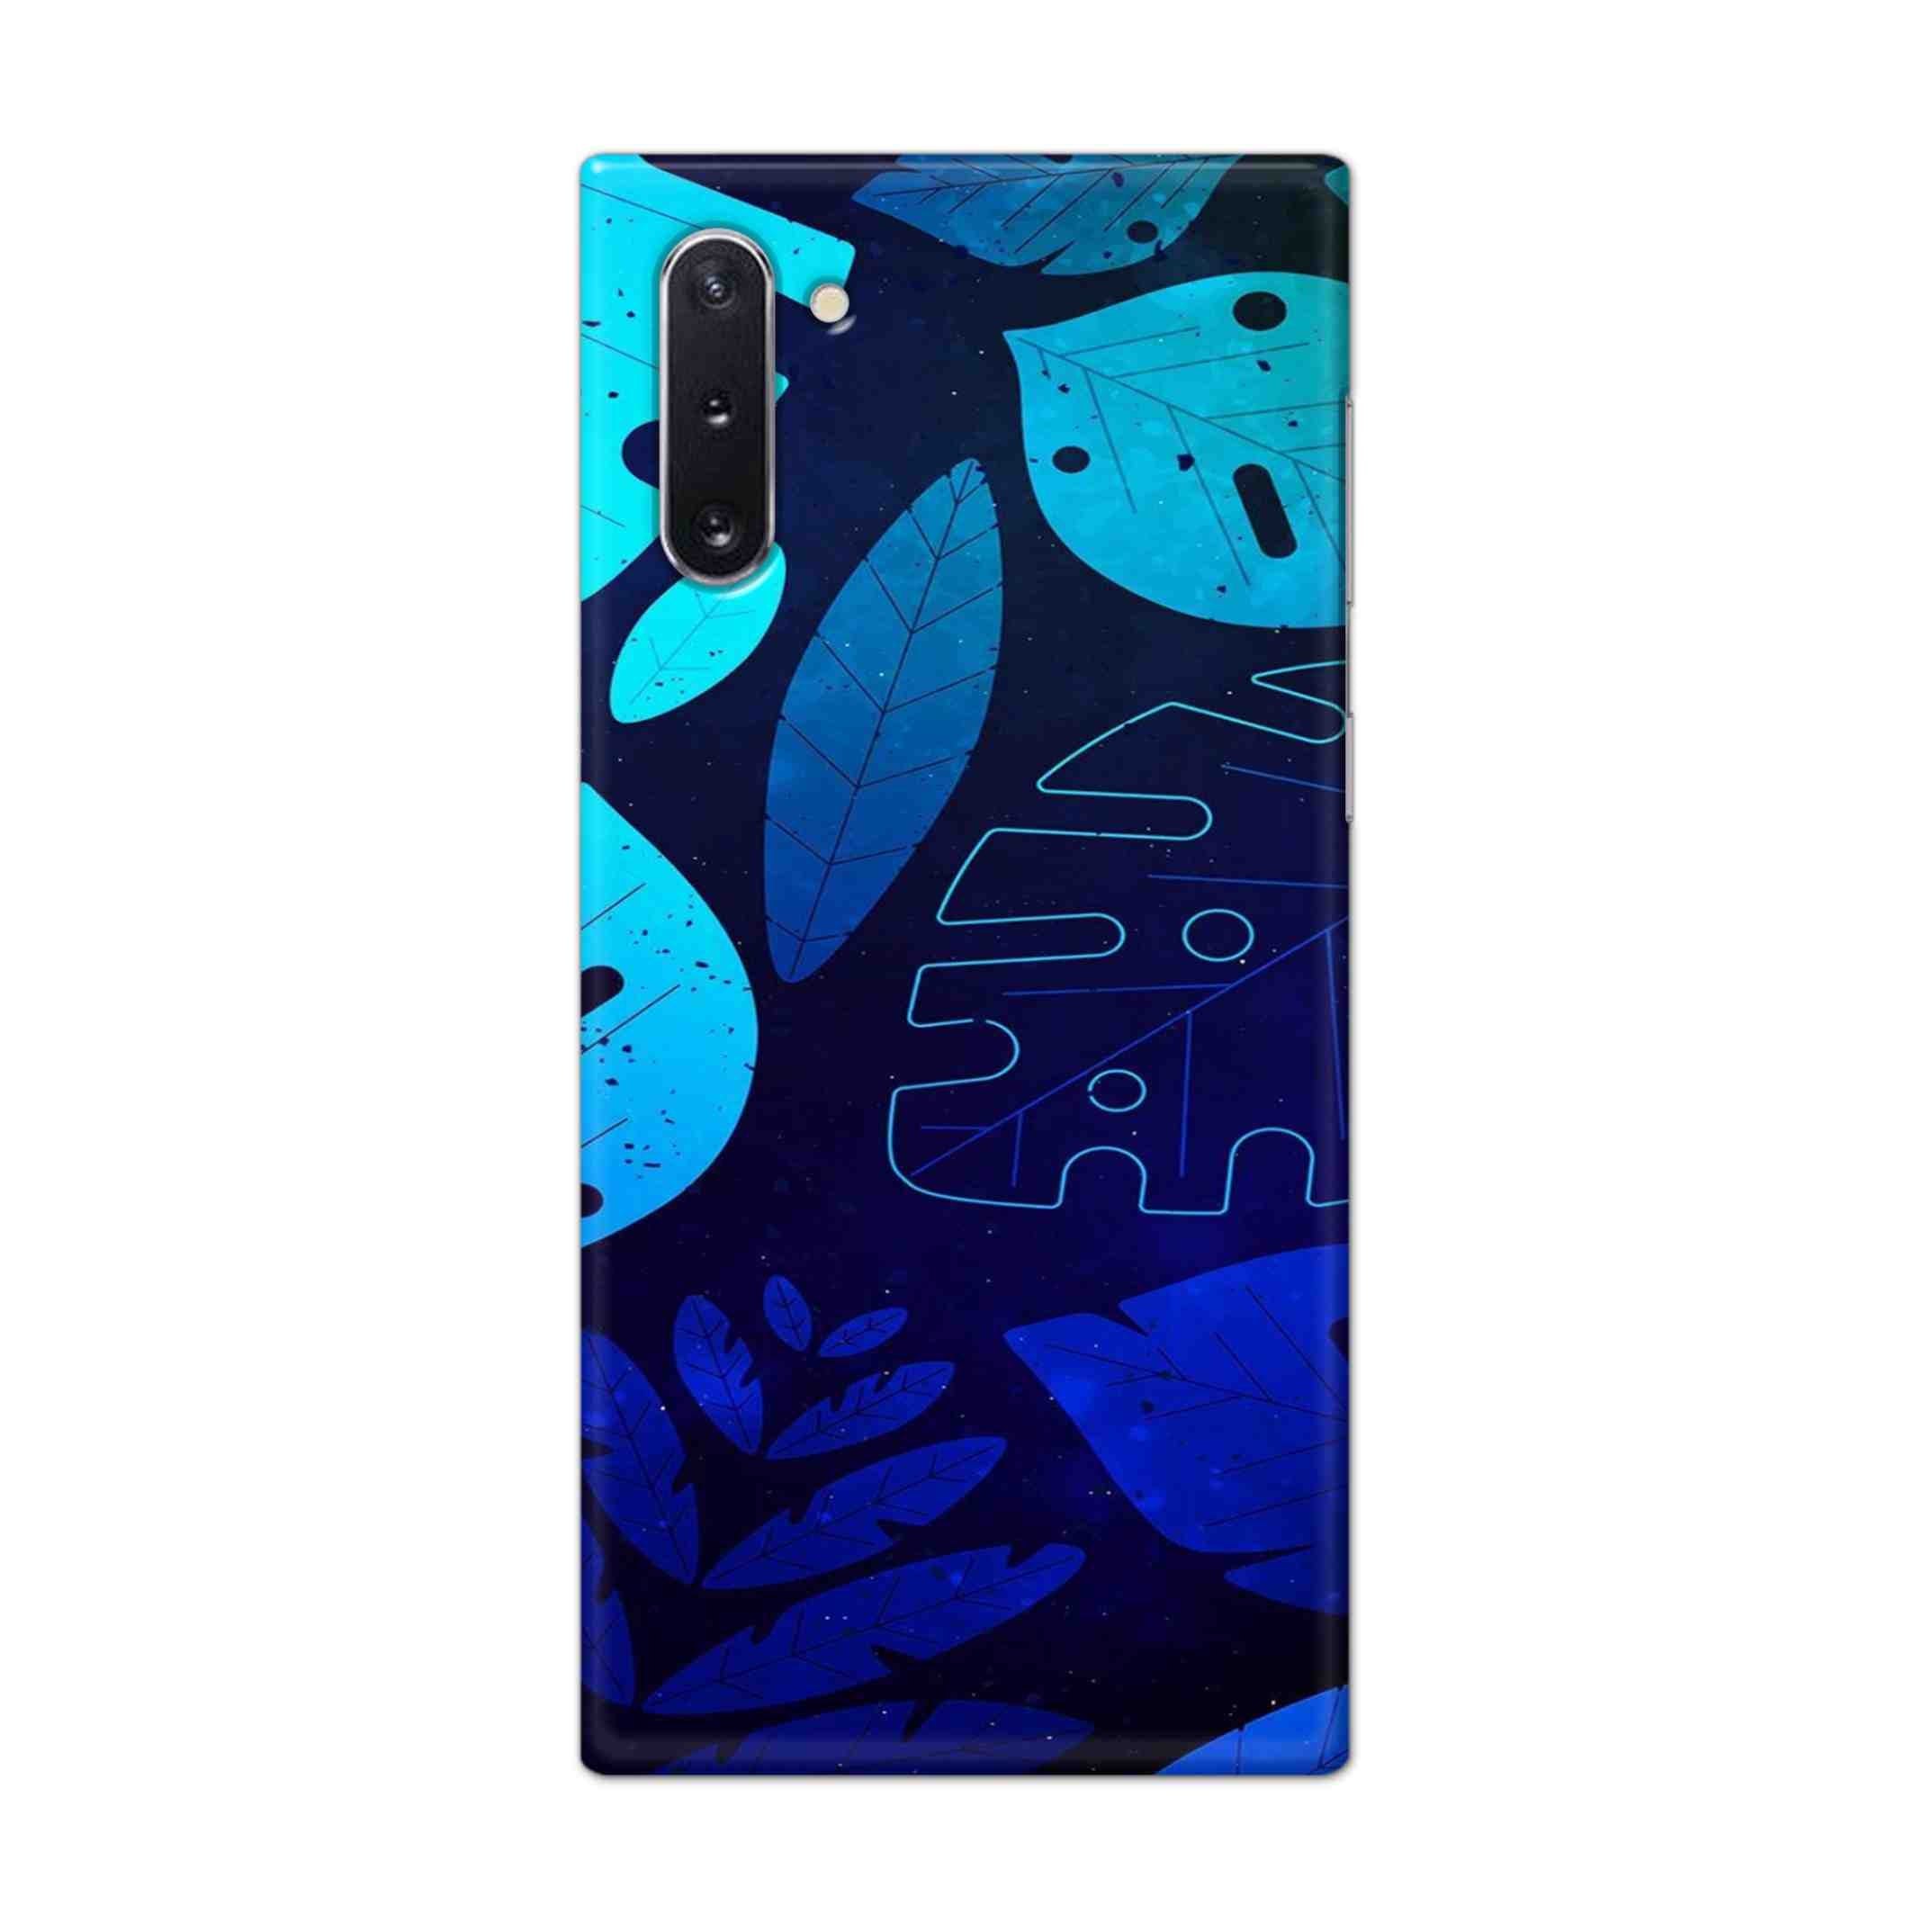 Buy Neon Leaf Hard Back Mobile Phone Case Cover For Samsung Galaxy Note 10 Online